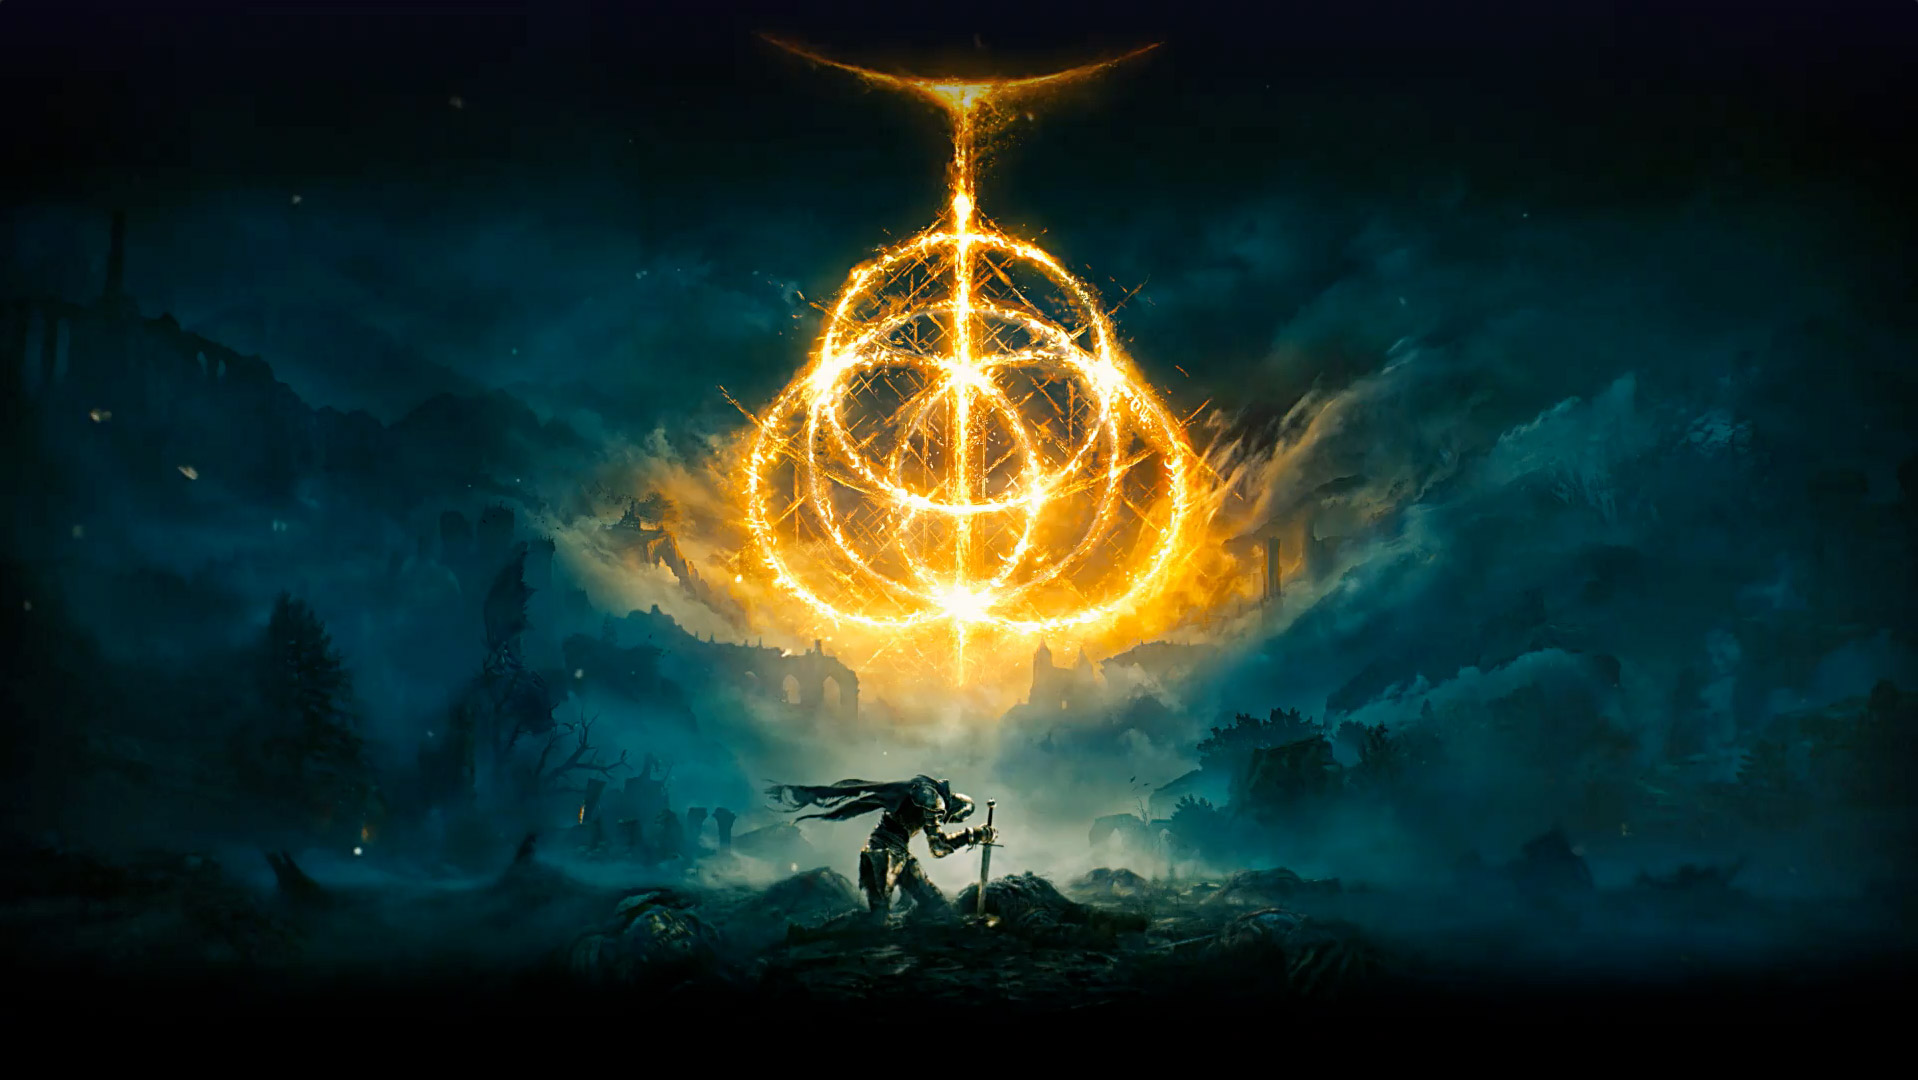 Elden Ring. Multiple fiery rings creating the Elden Ring symbol. Knight character with their sword in the ground in a desolate area with fog.